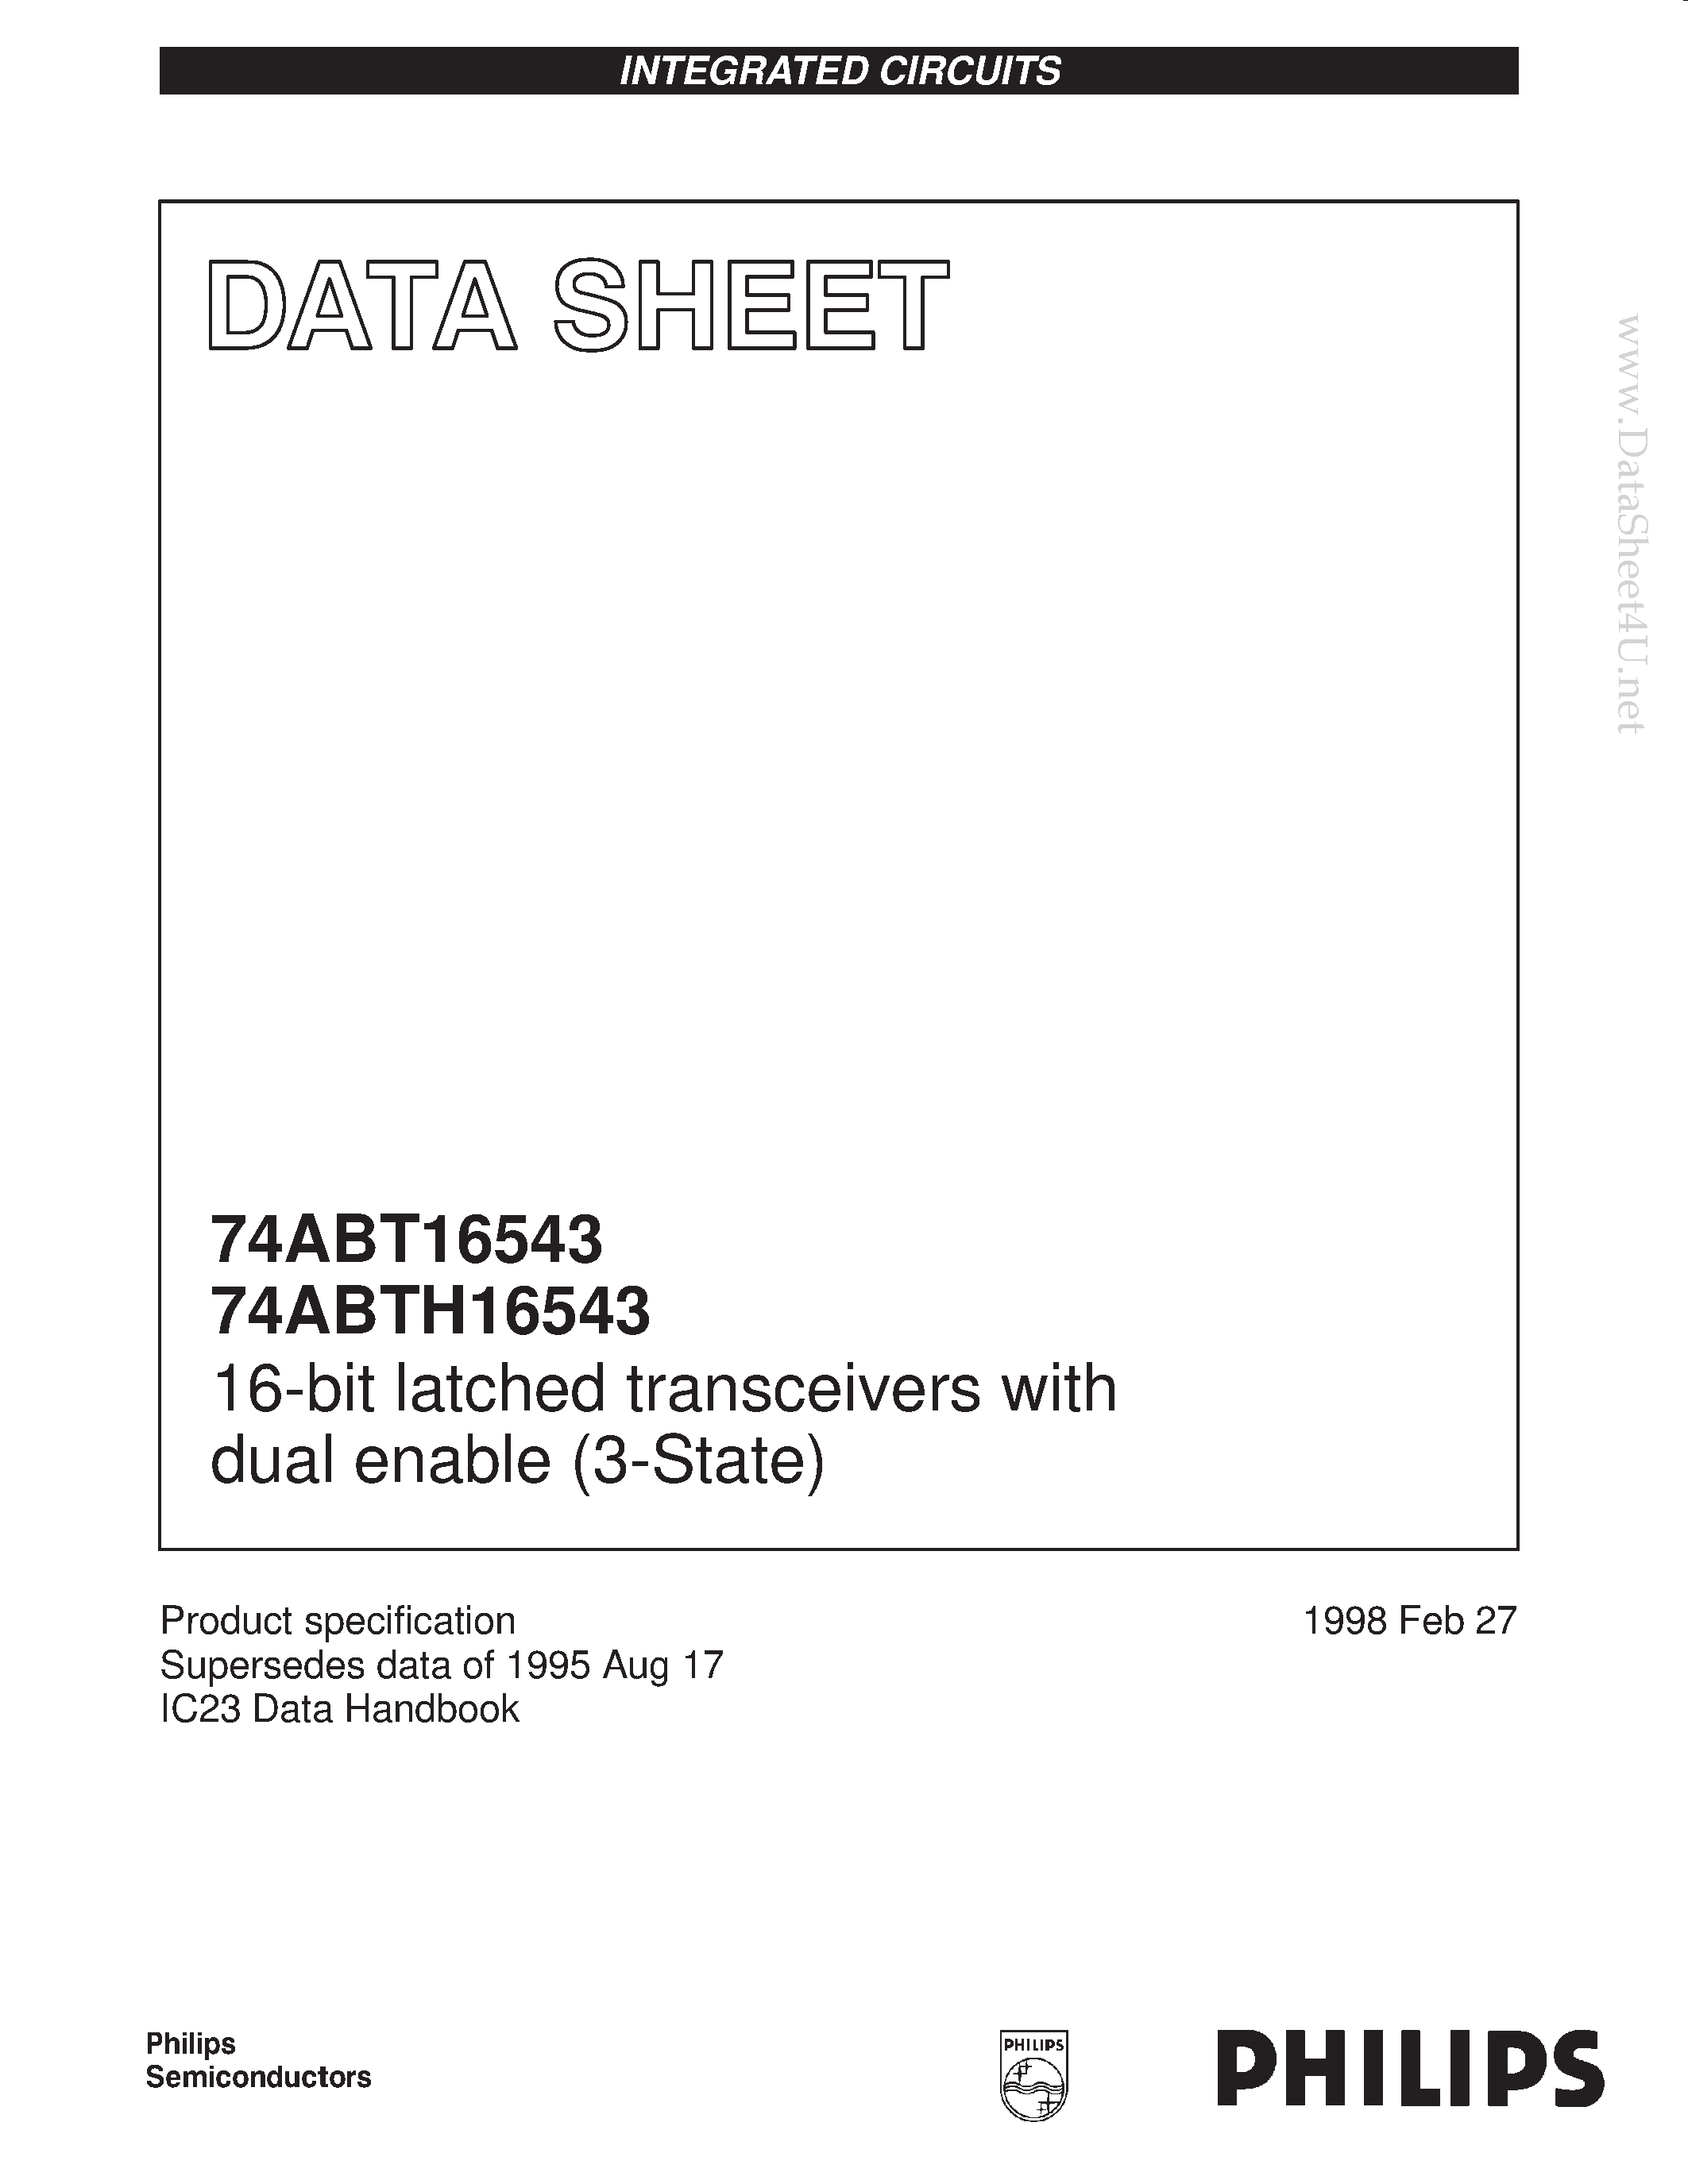 Datasheet 74ABTH16543 - 16-bit latched transceivers with dual enable 3-State page 1